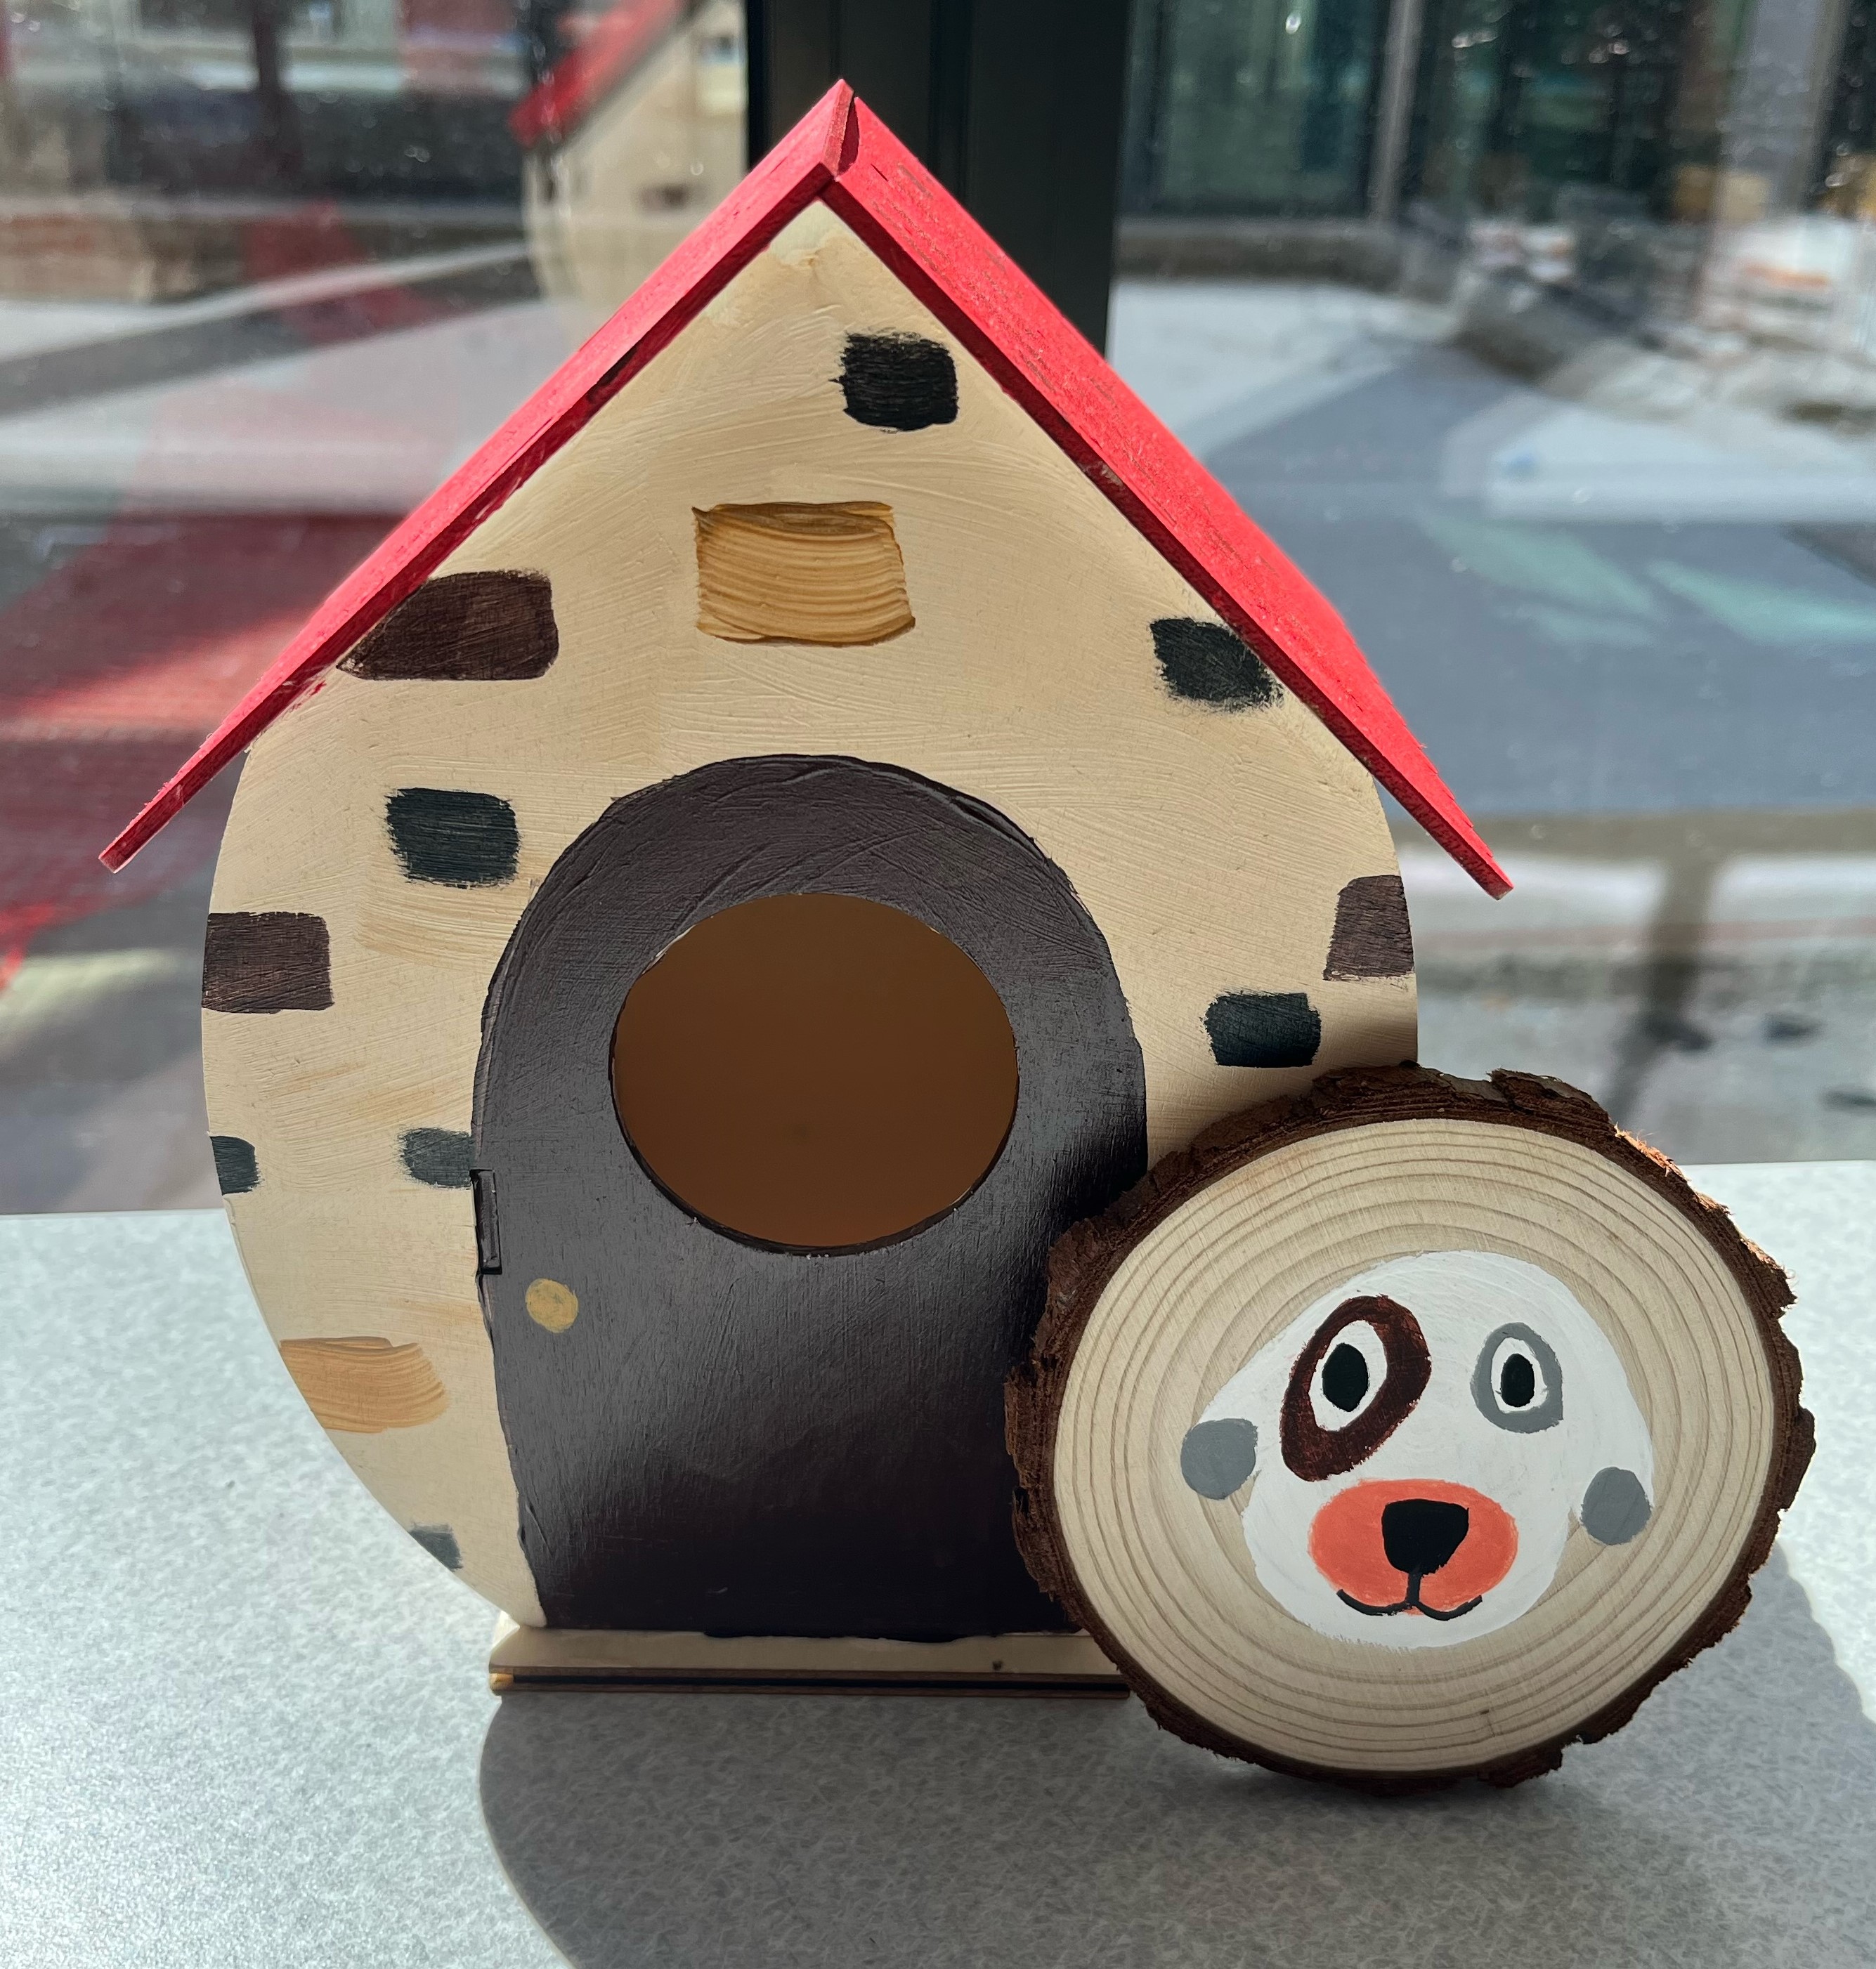 Paint your own birdhouse and villager coaster!